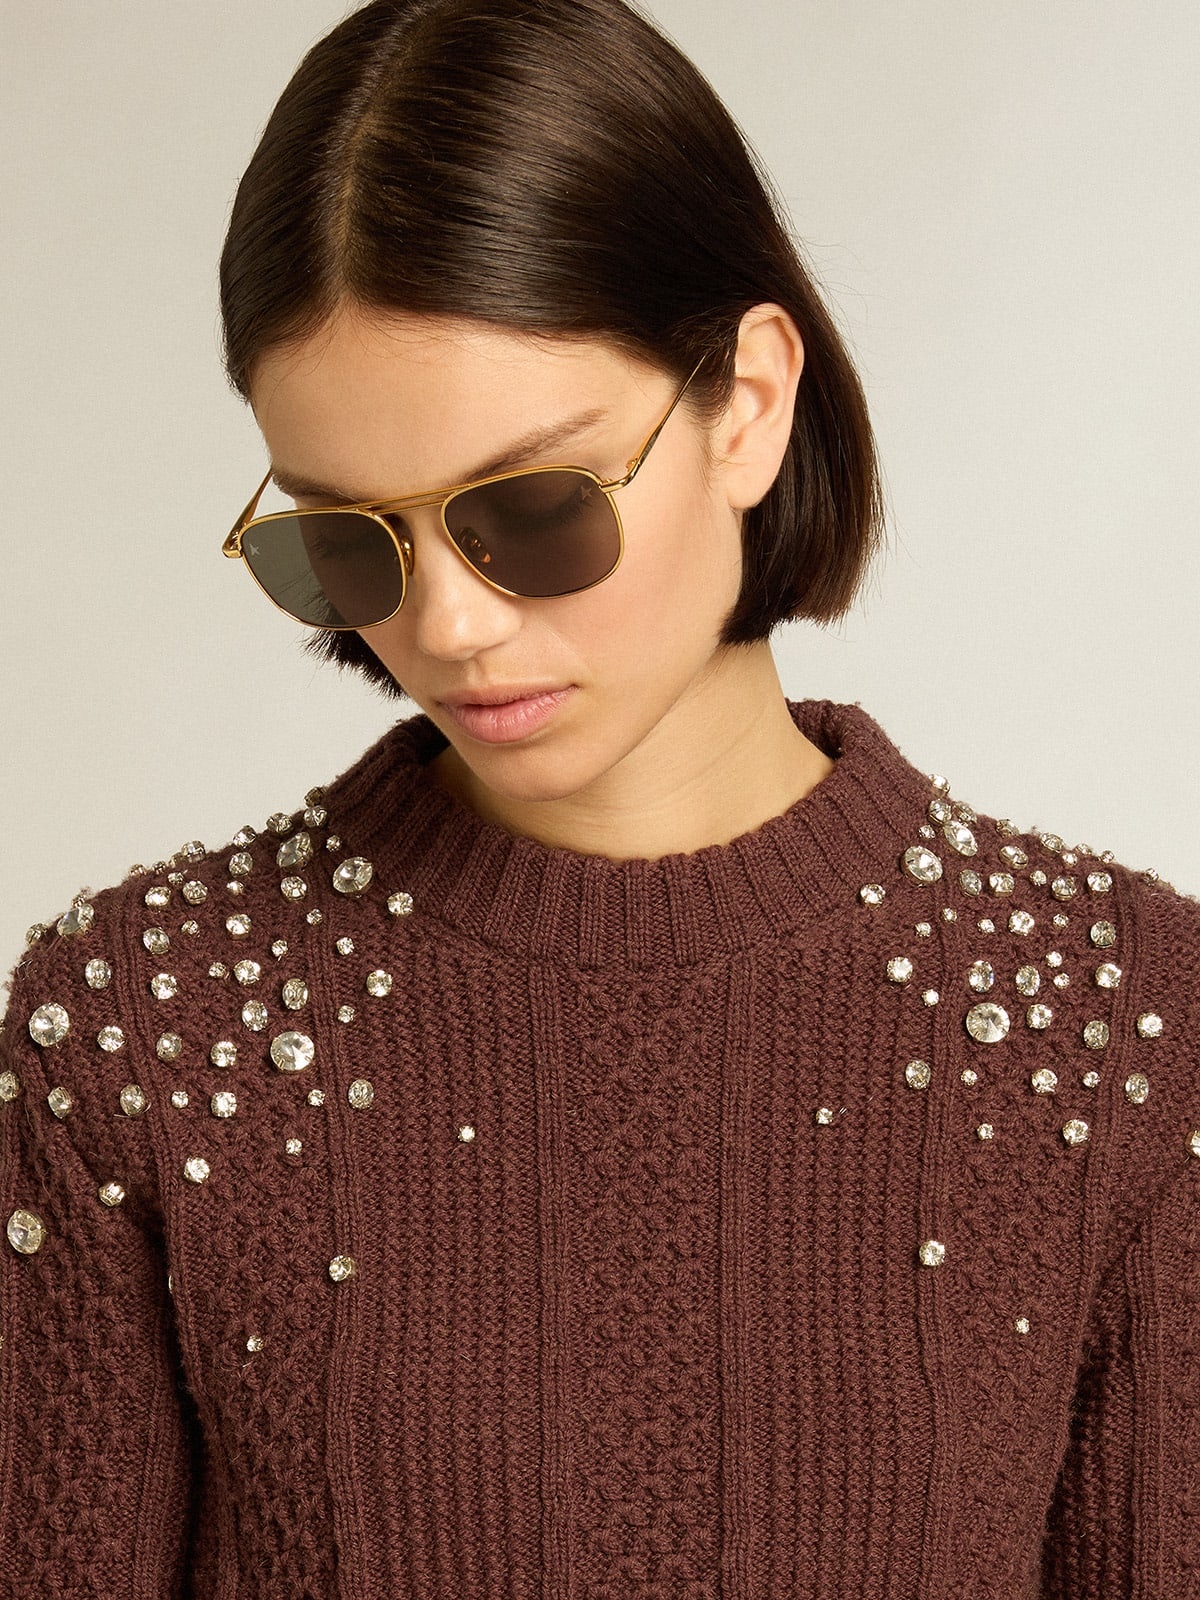 Cropped sweater in burgundy wool with crystals - 2